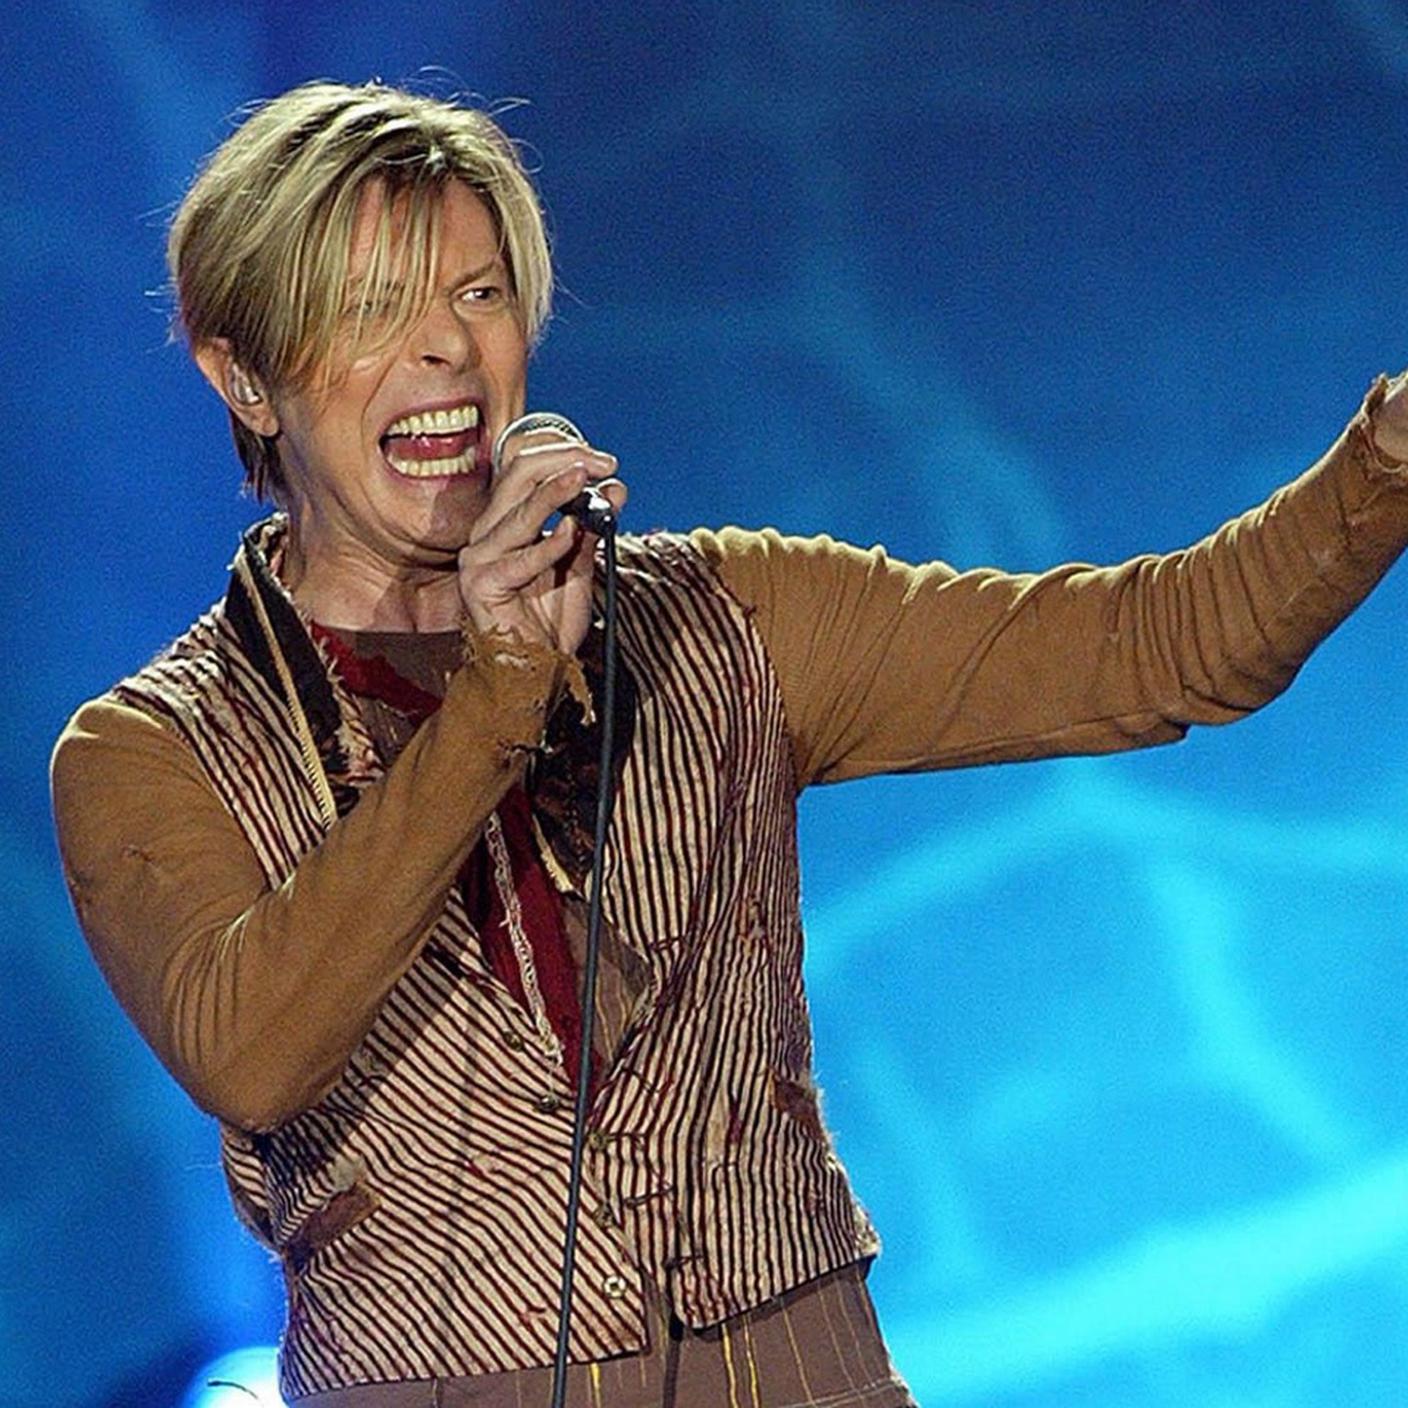 David Bowie in concerto a Manchester nel 2003